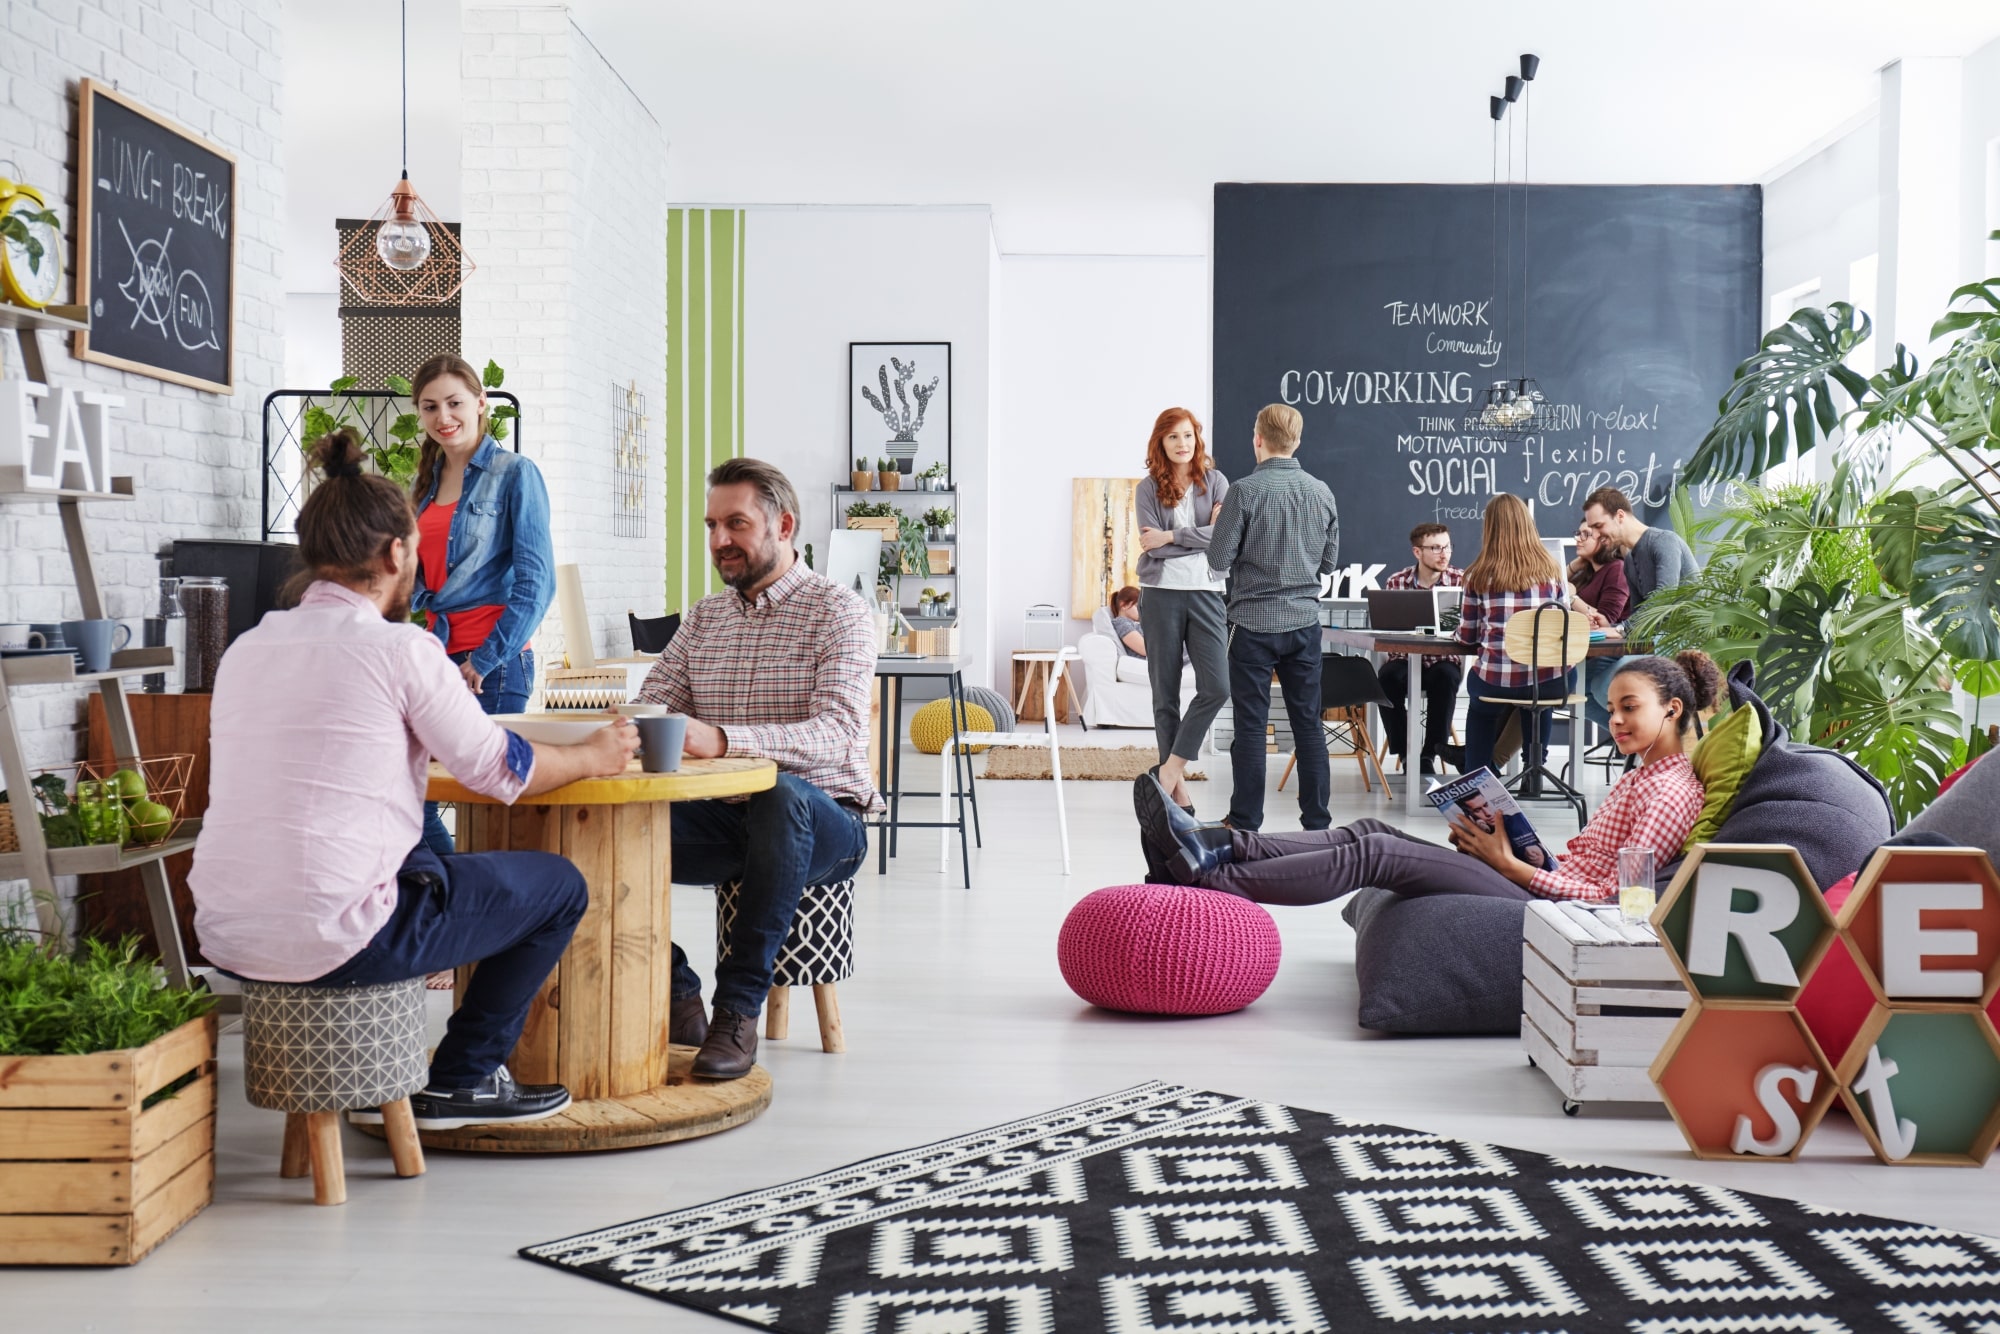 Workers relaxing in a shared recreation zone is a funky coworking office.